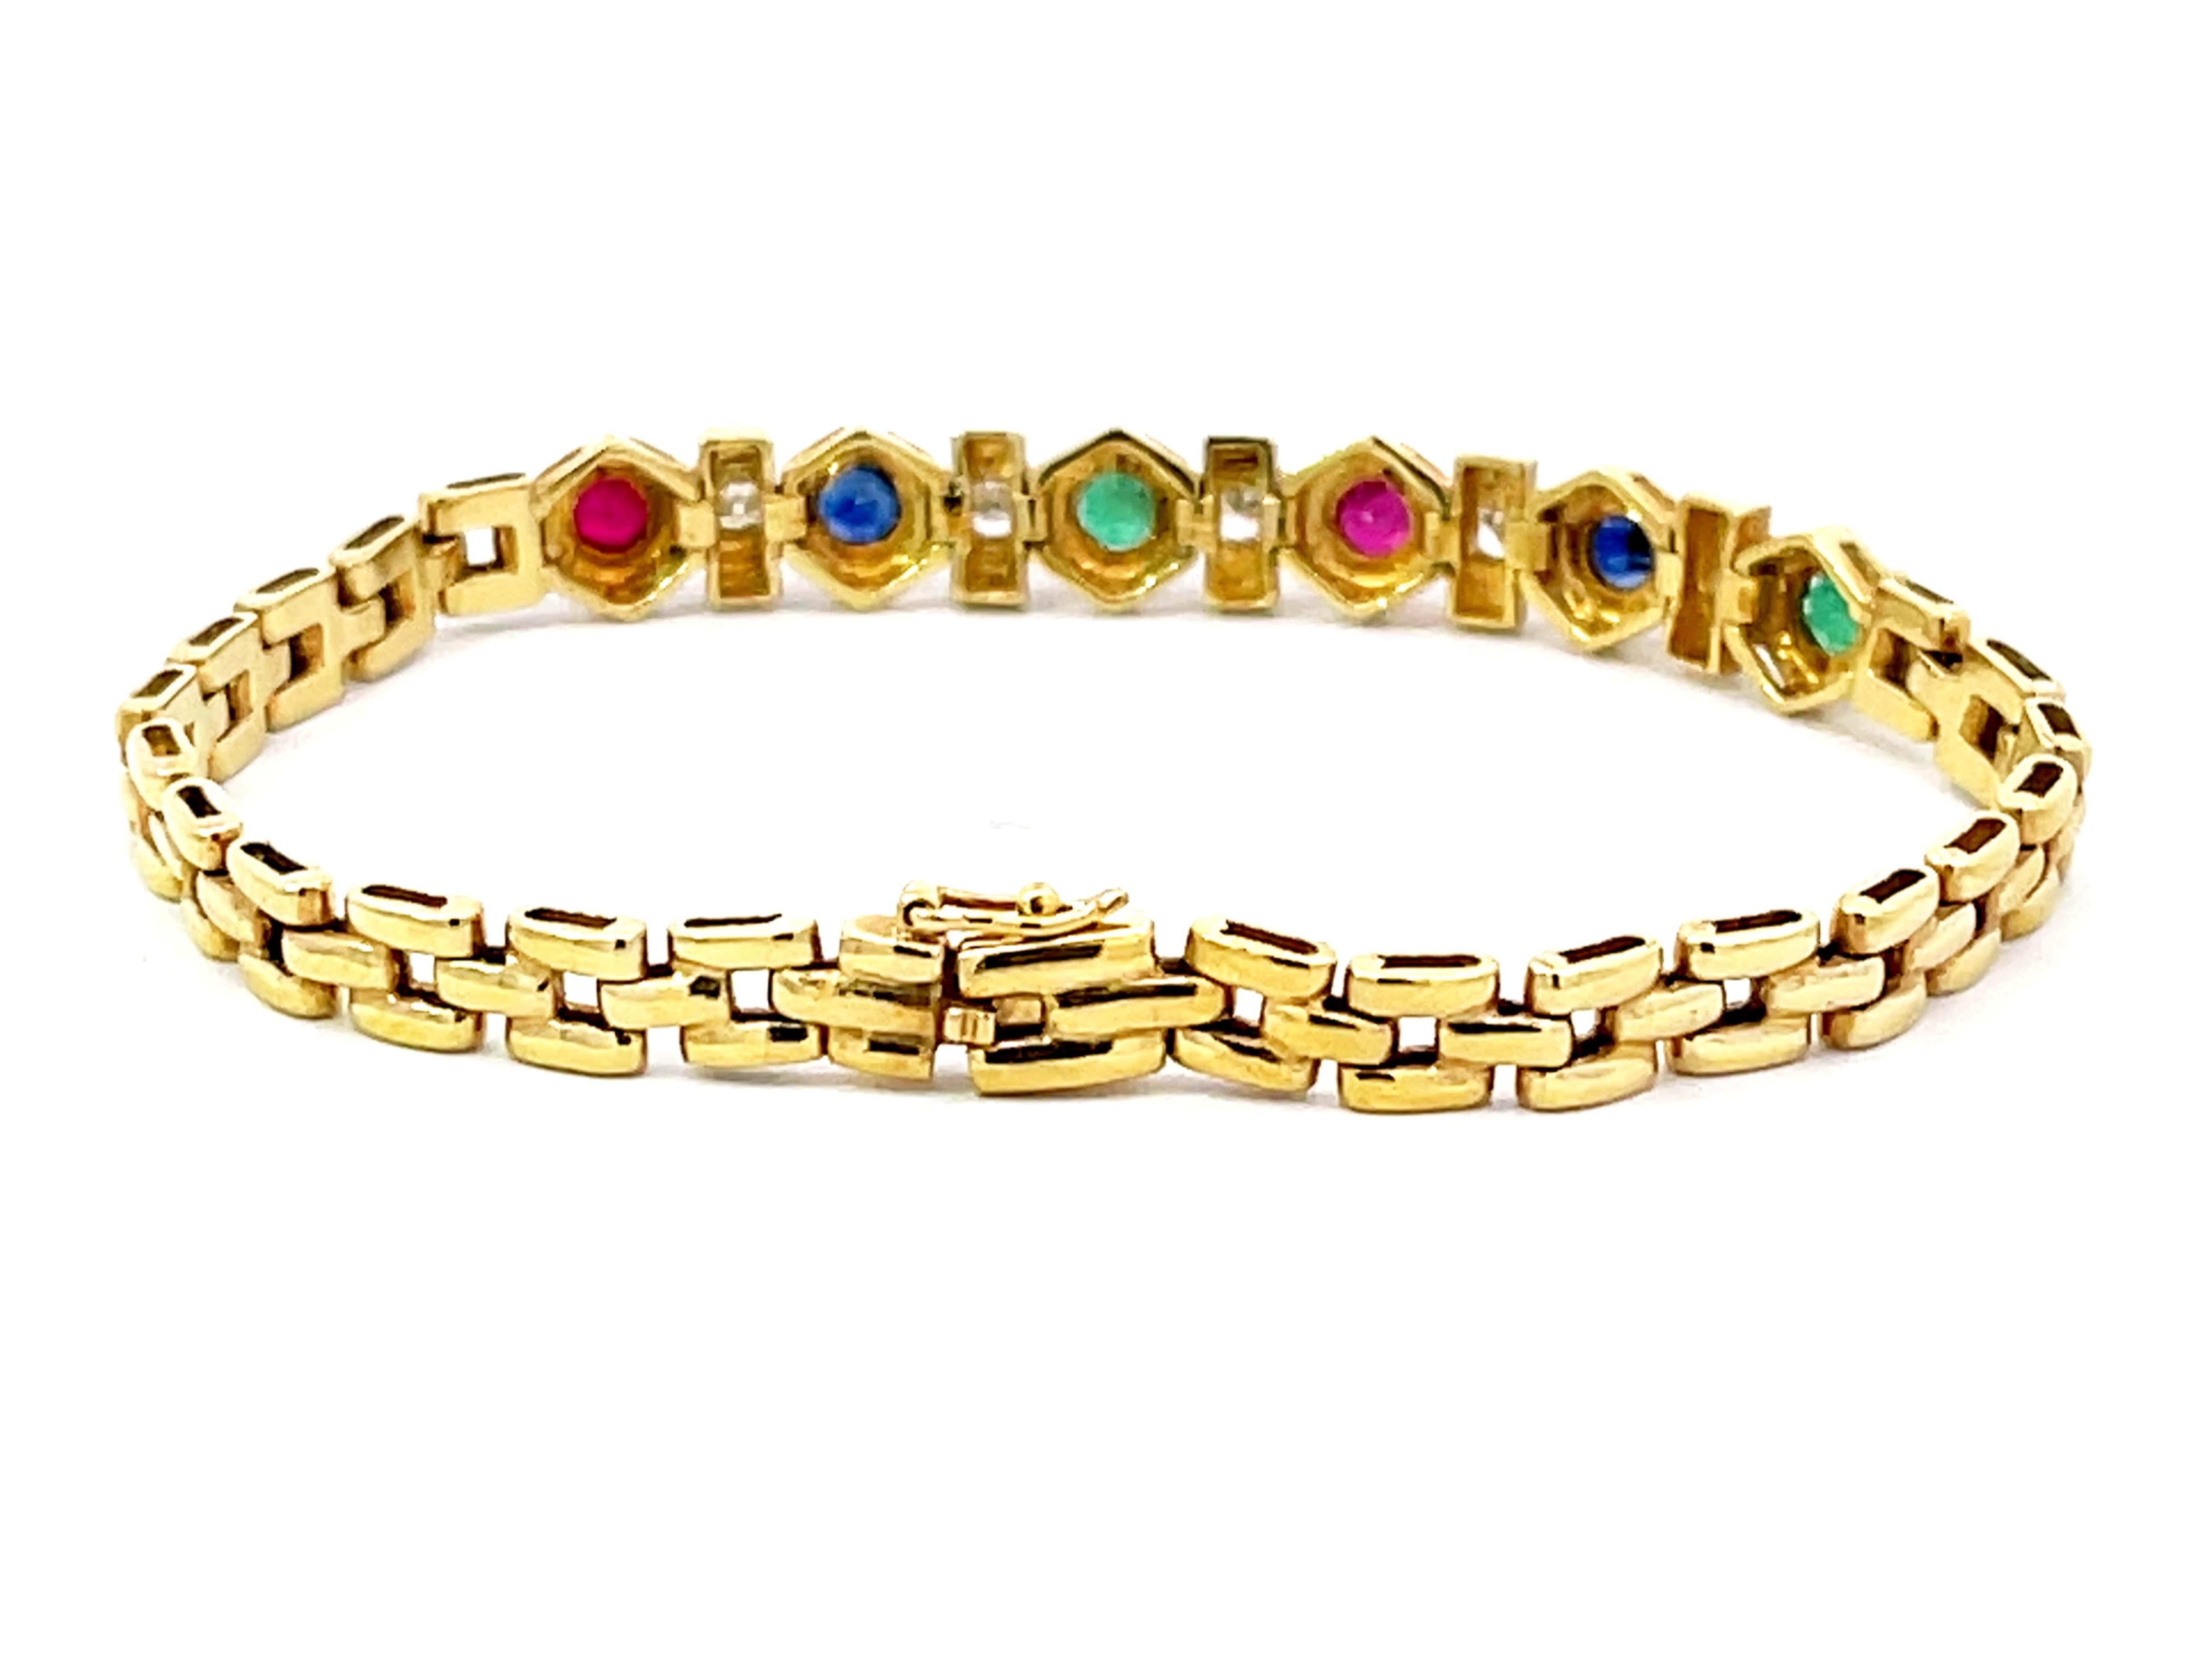 Emerald Sapphire Ruby and Diamond Bracelet in 18k Yellow Gold In Excellent Condition For Sale In Honolulu, HI